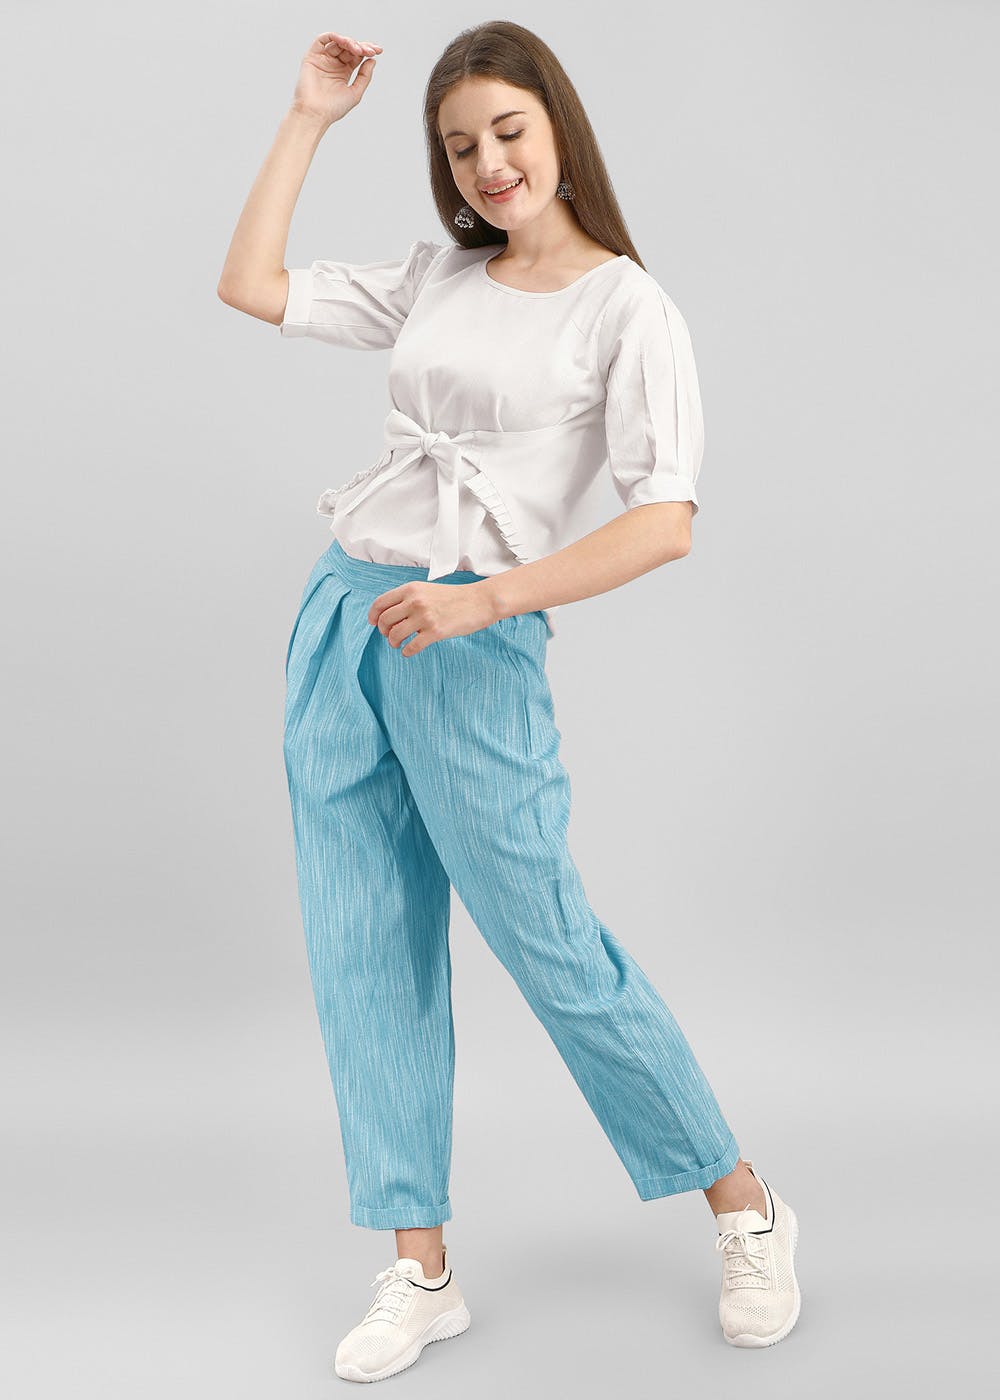 Blue Mens Trousers  Buy Blue Mens Trousers Online at Best Prices In India   Flipkartcom